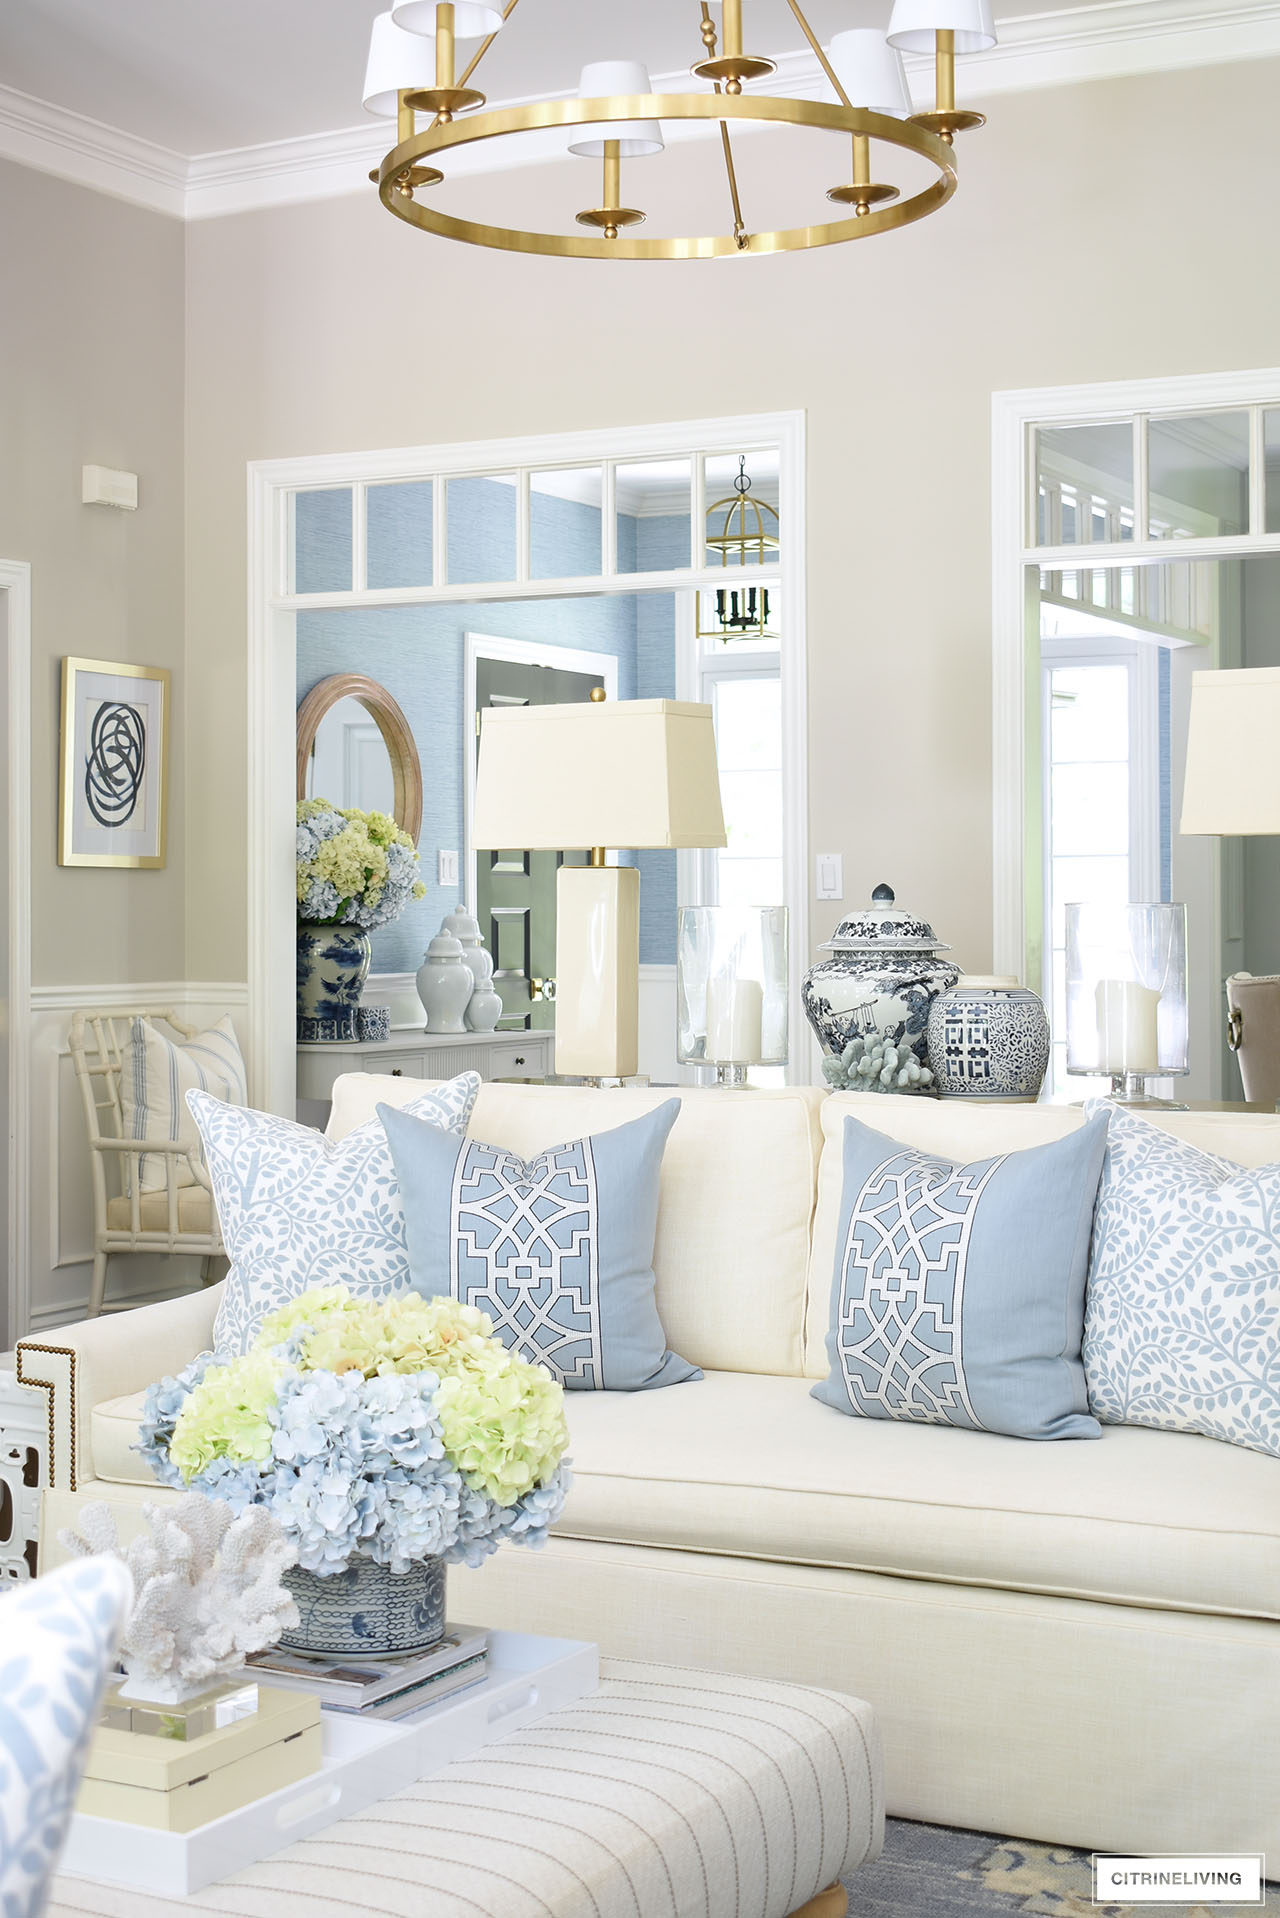 Elegant blue and white pillows styled on a white sofa, a light green and blue hydrangea arrangement sits in front on an upholstered ottoman. Blue and white ginger jars styled throughout the room and beyond.